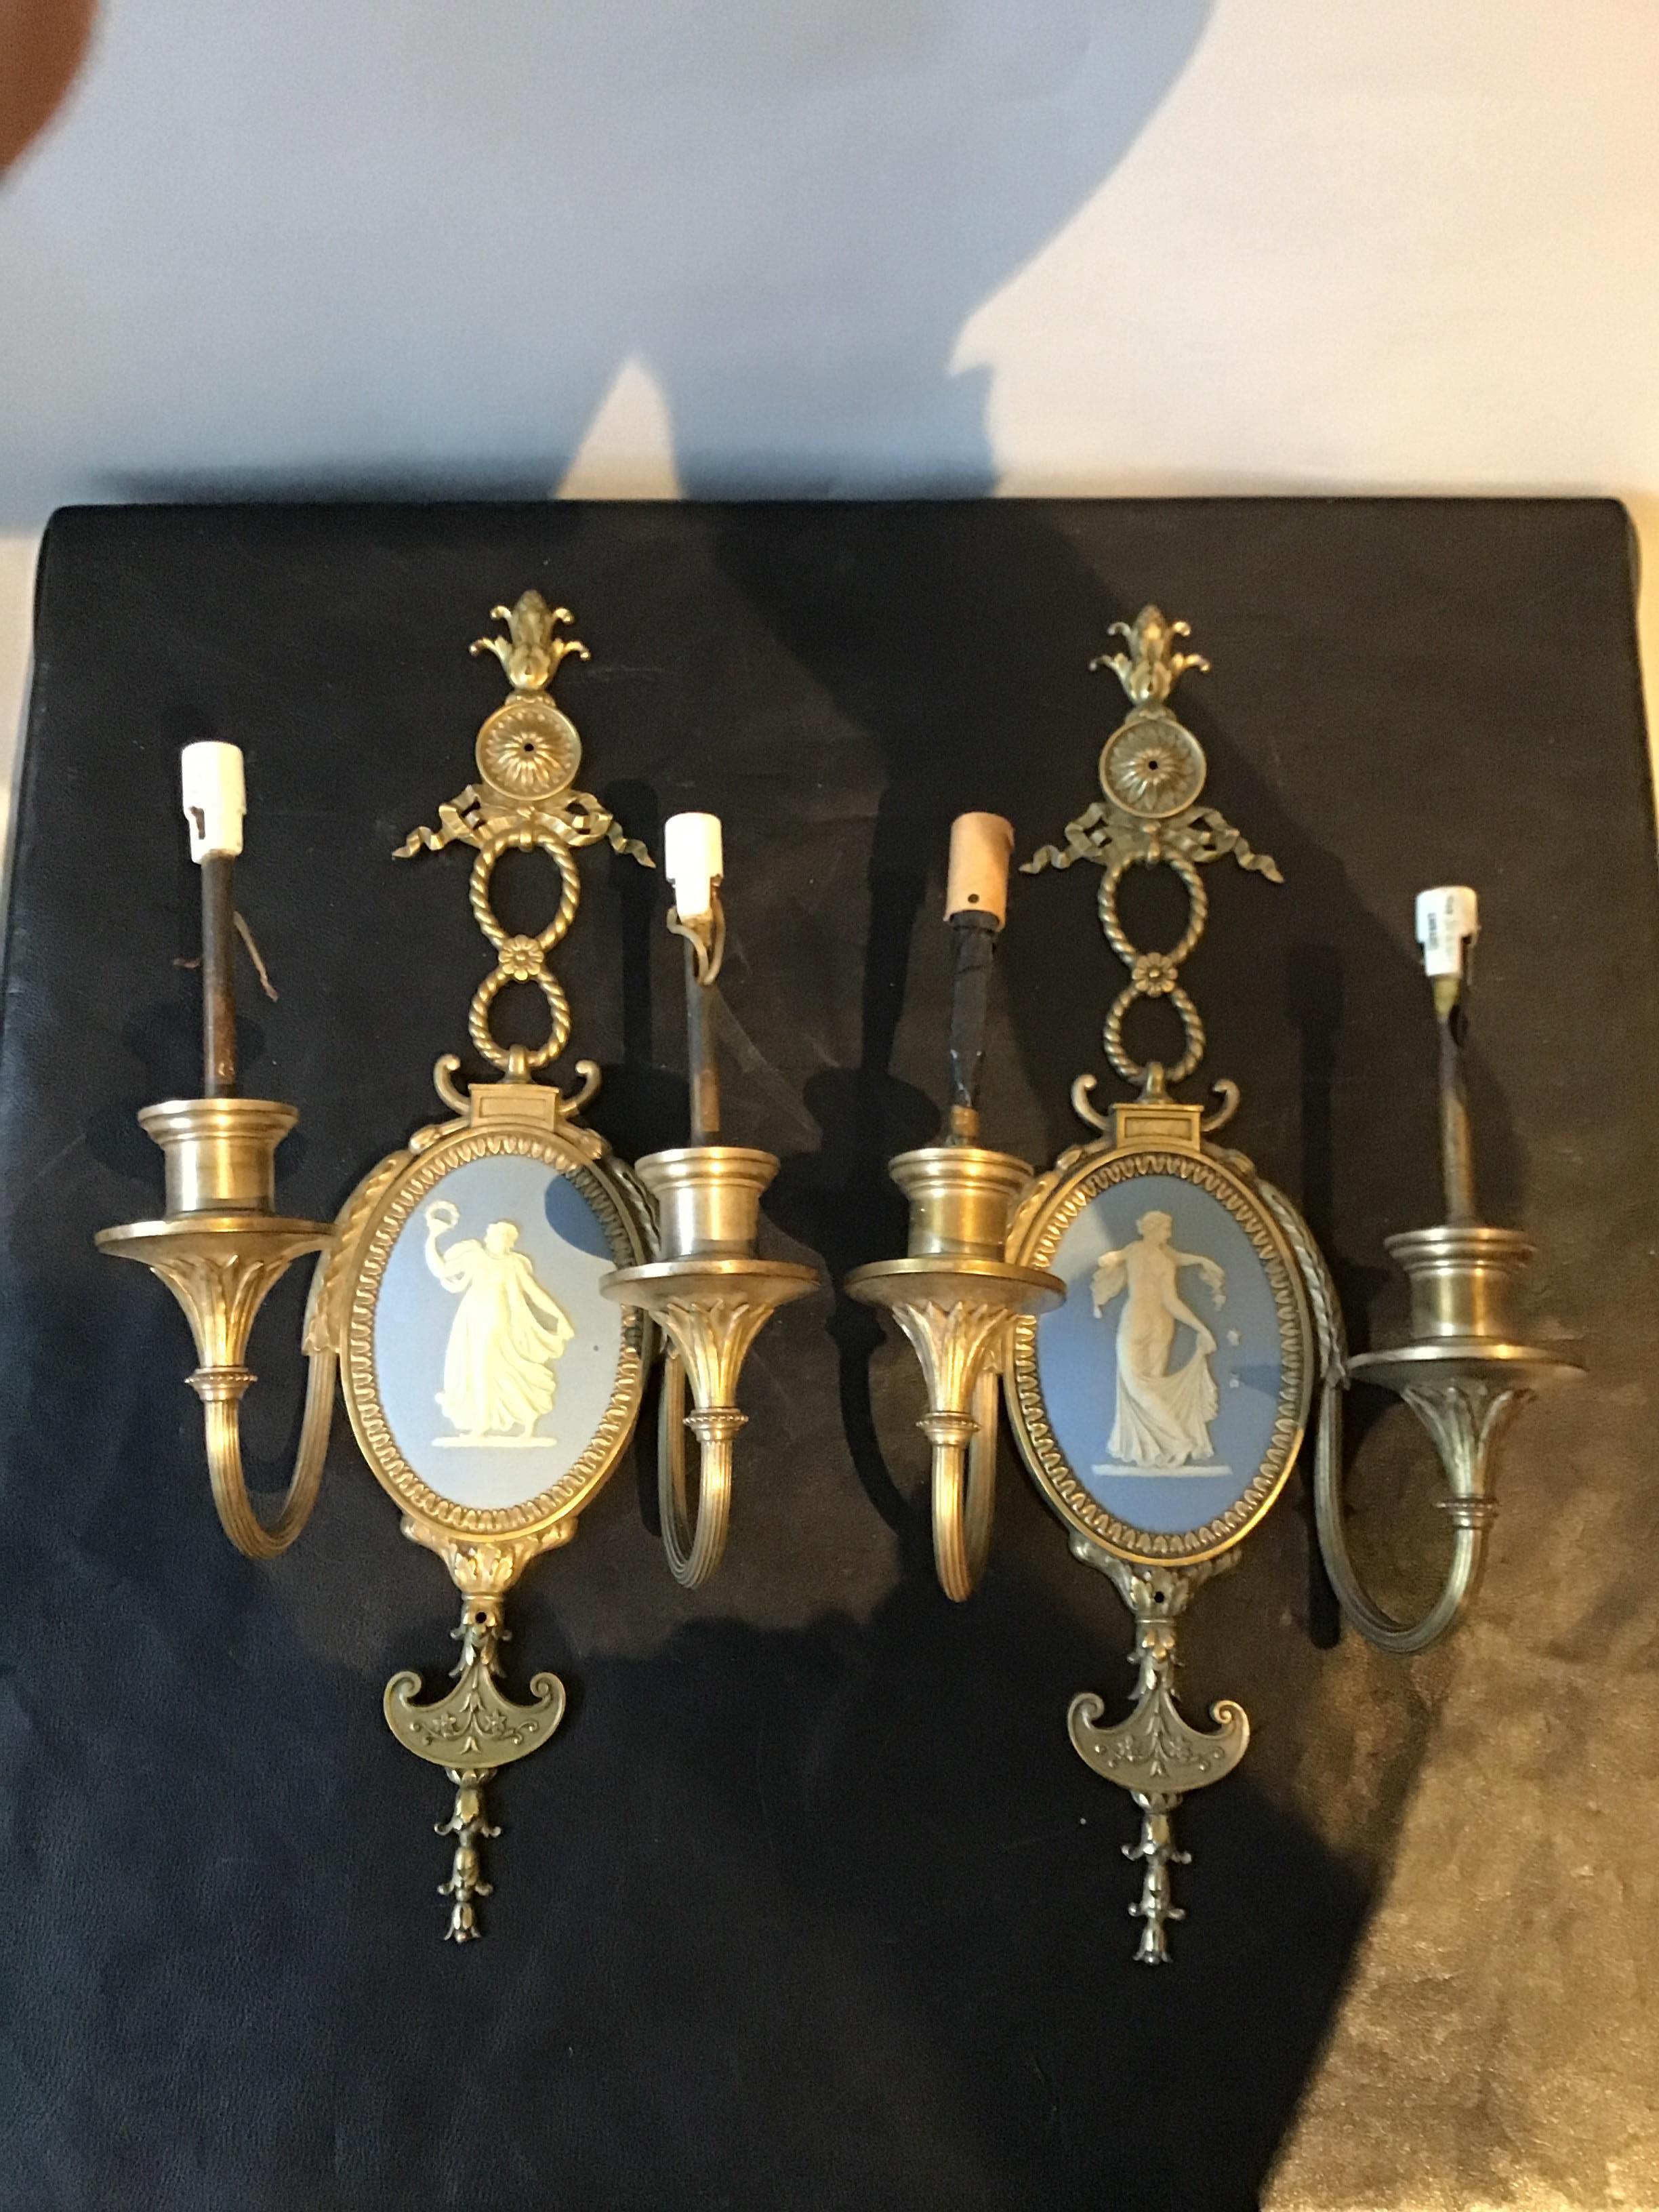 1940s Wedgwood sconces. Silver plate sconces with a brass finish. In places where the brass was polished away, silver plate shows through.